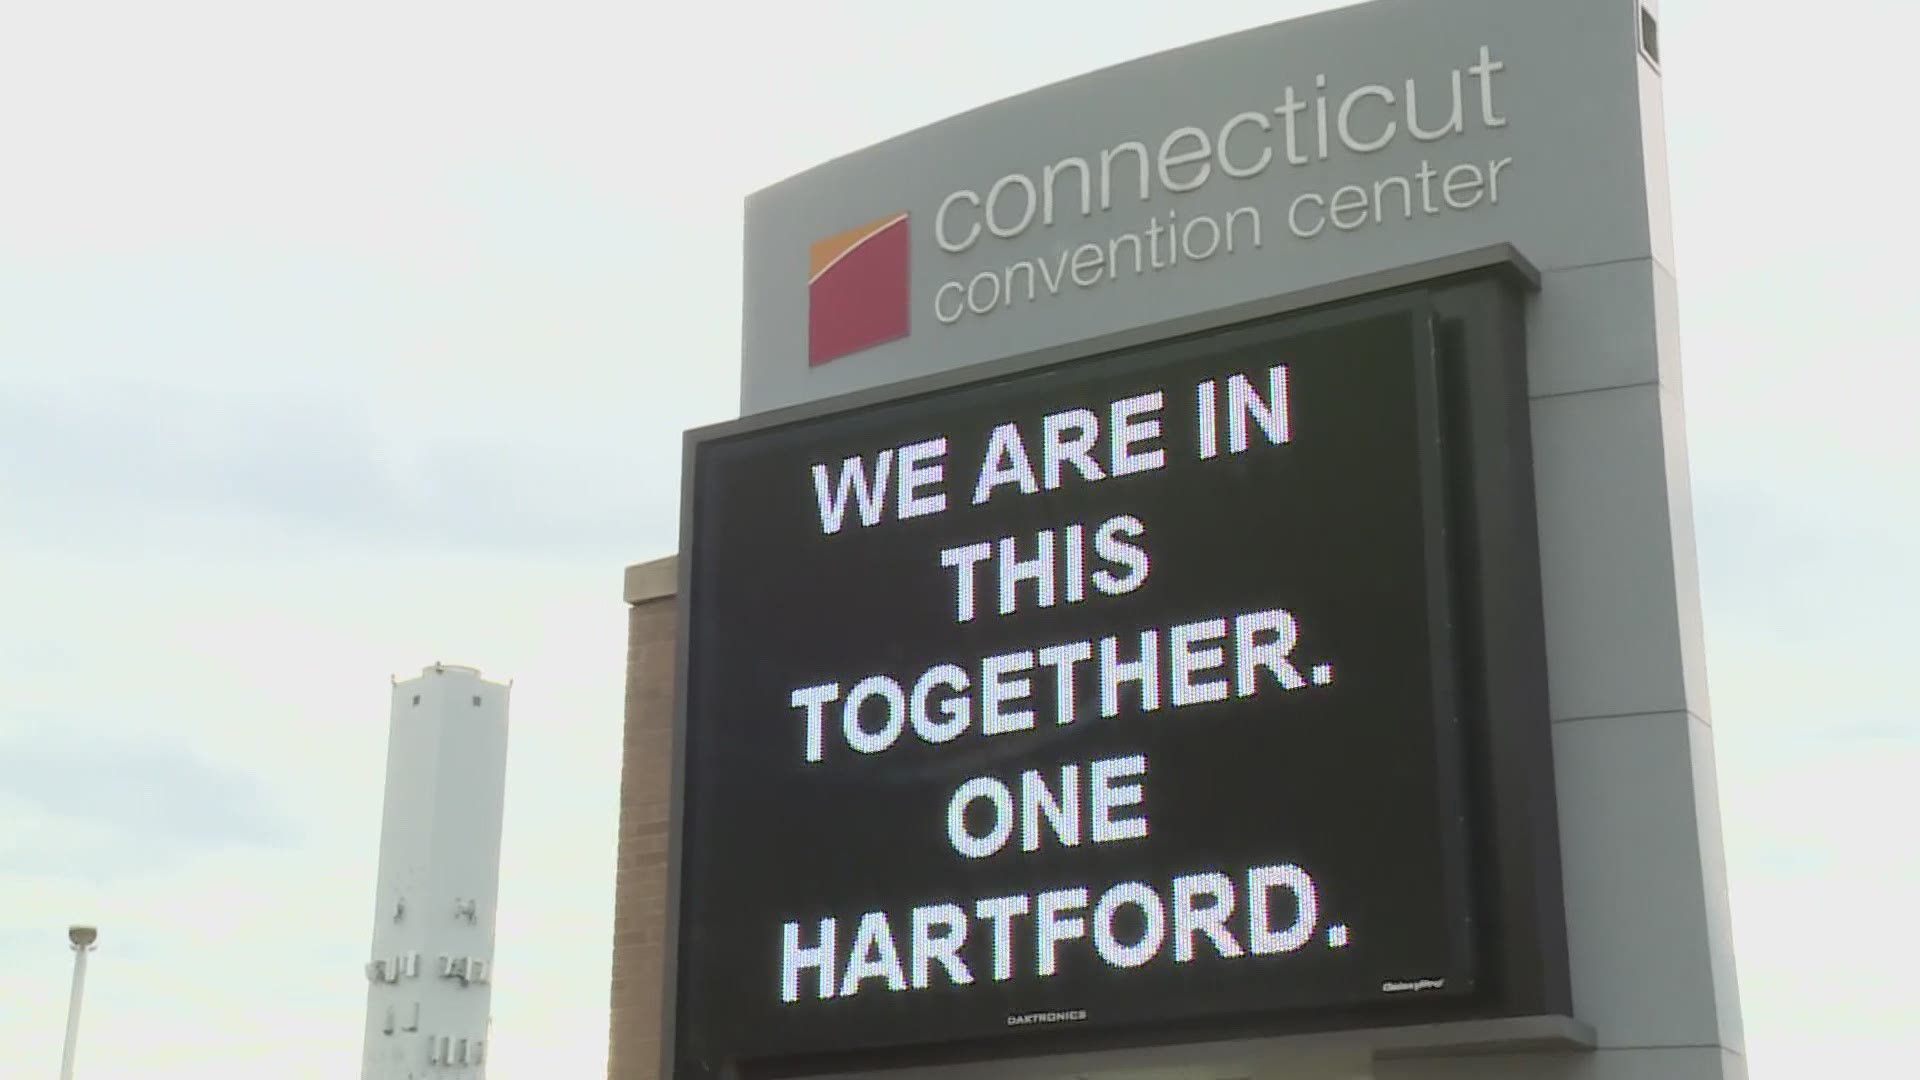 The site will double Hartford Healthcare's testing capacity.